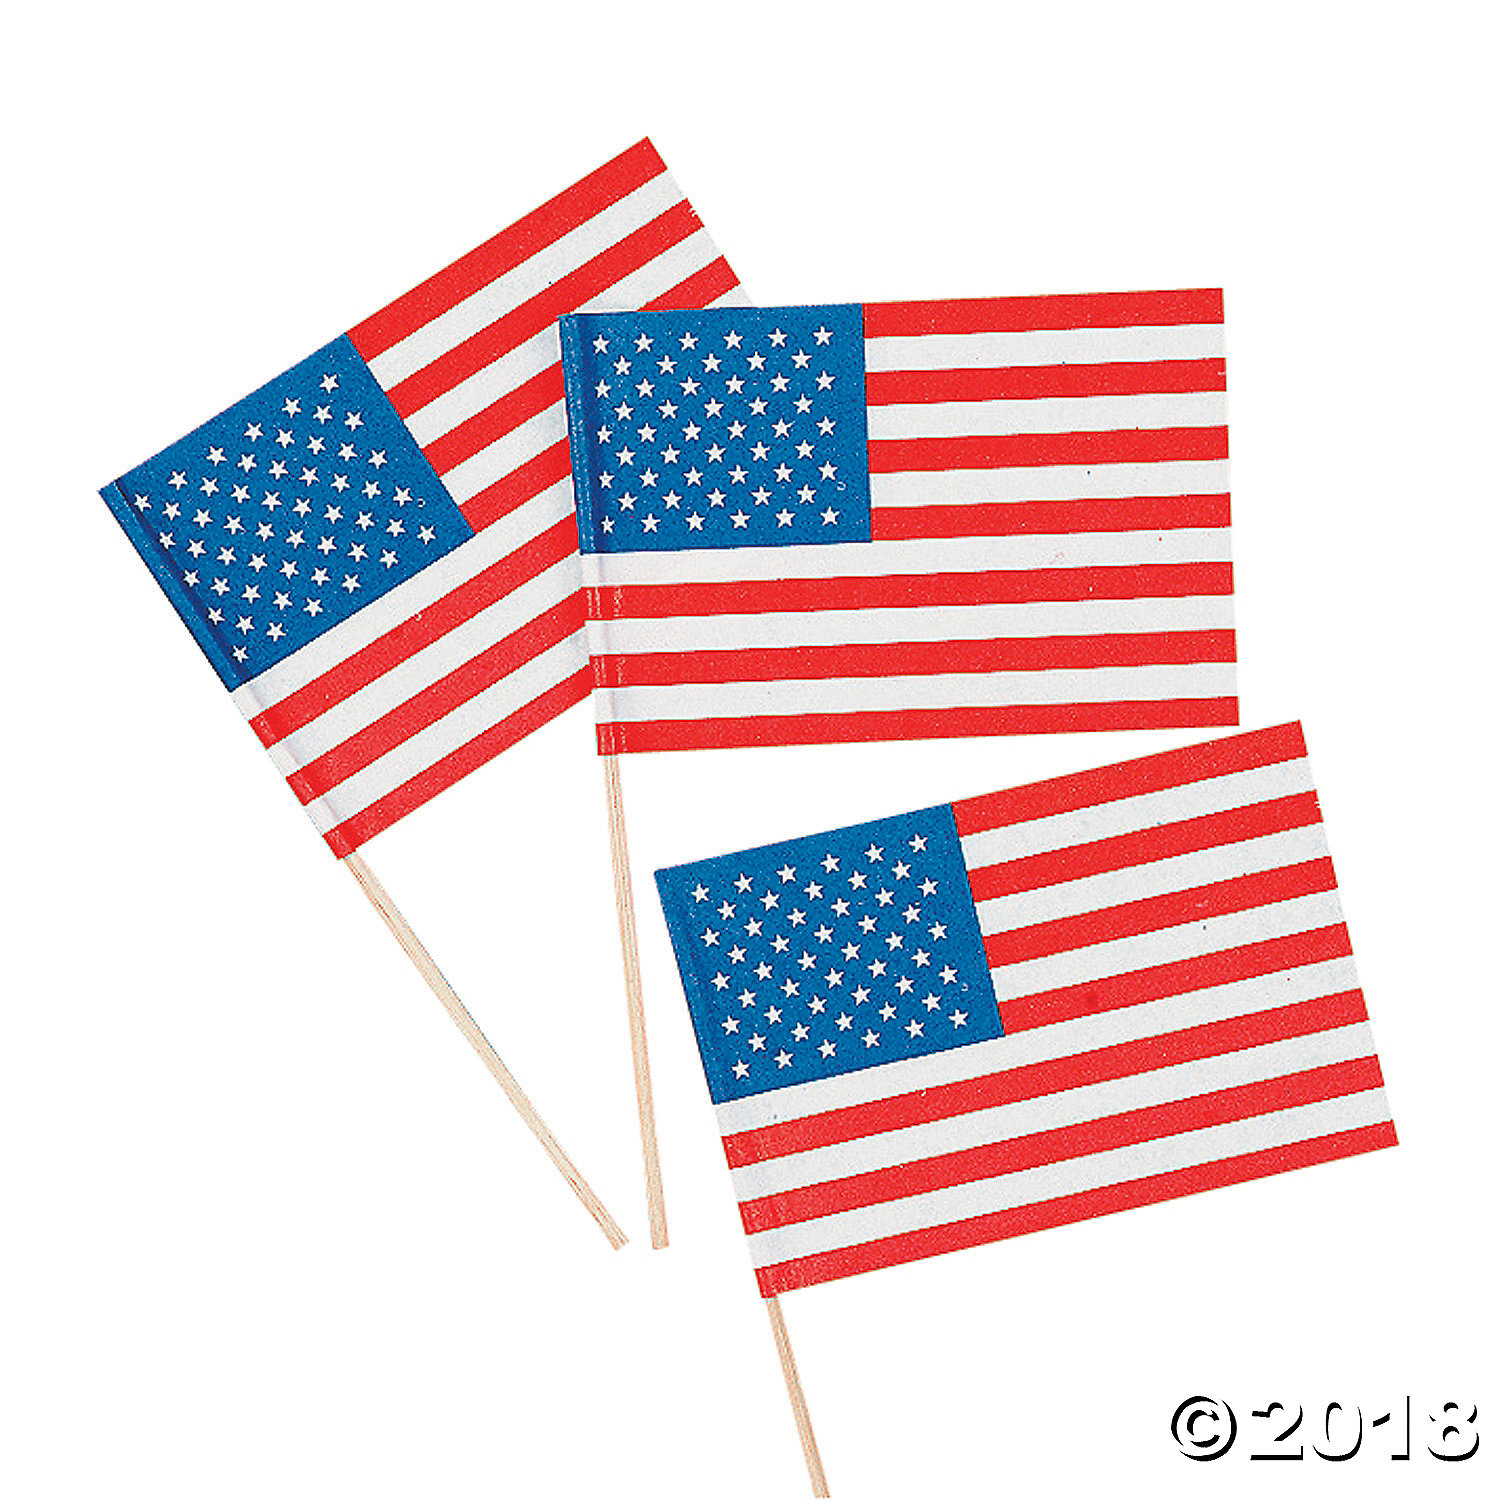 Small Paper American Flags on Sticks